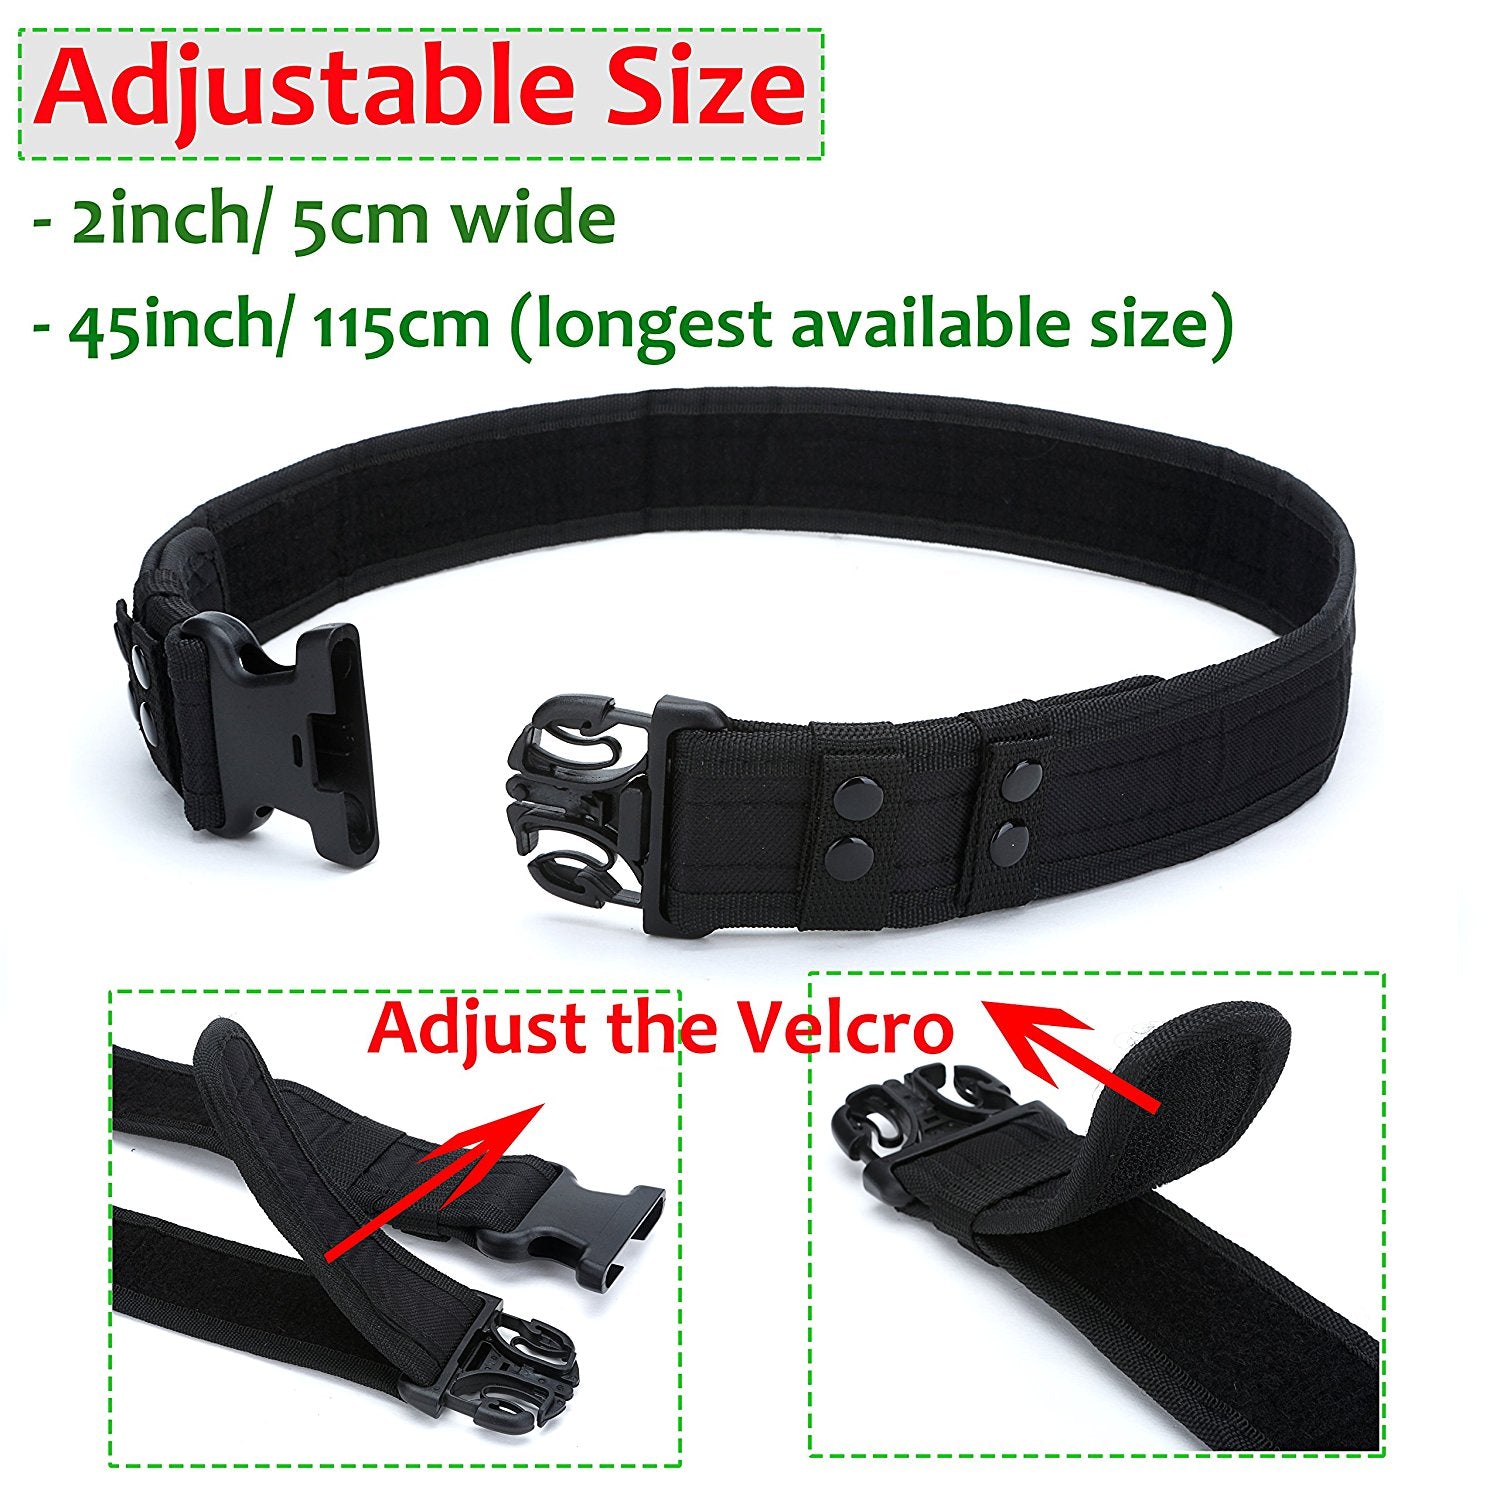 Yahill Security Tactical Belt Combat Gear Adjustable Heavy Duty Police Military Equipment Accessories for Sports Outdoor